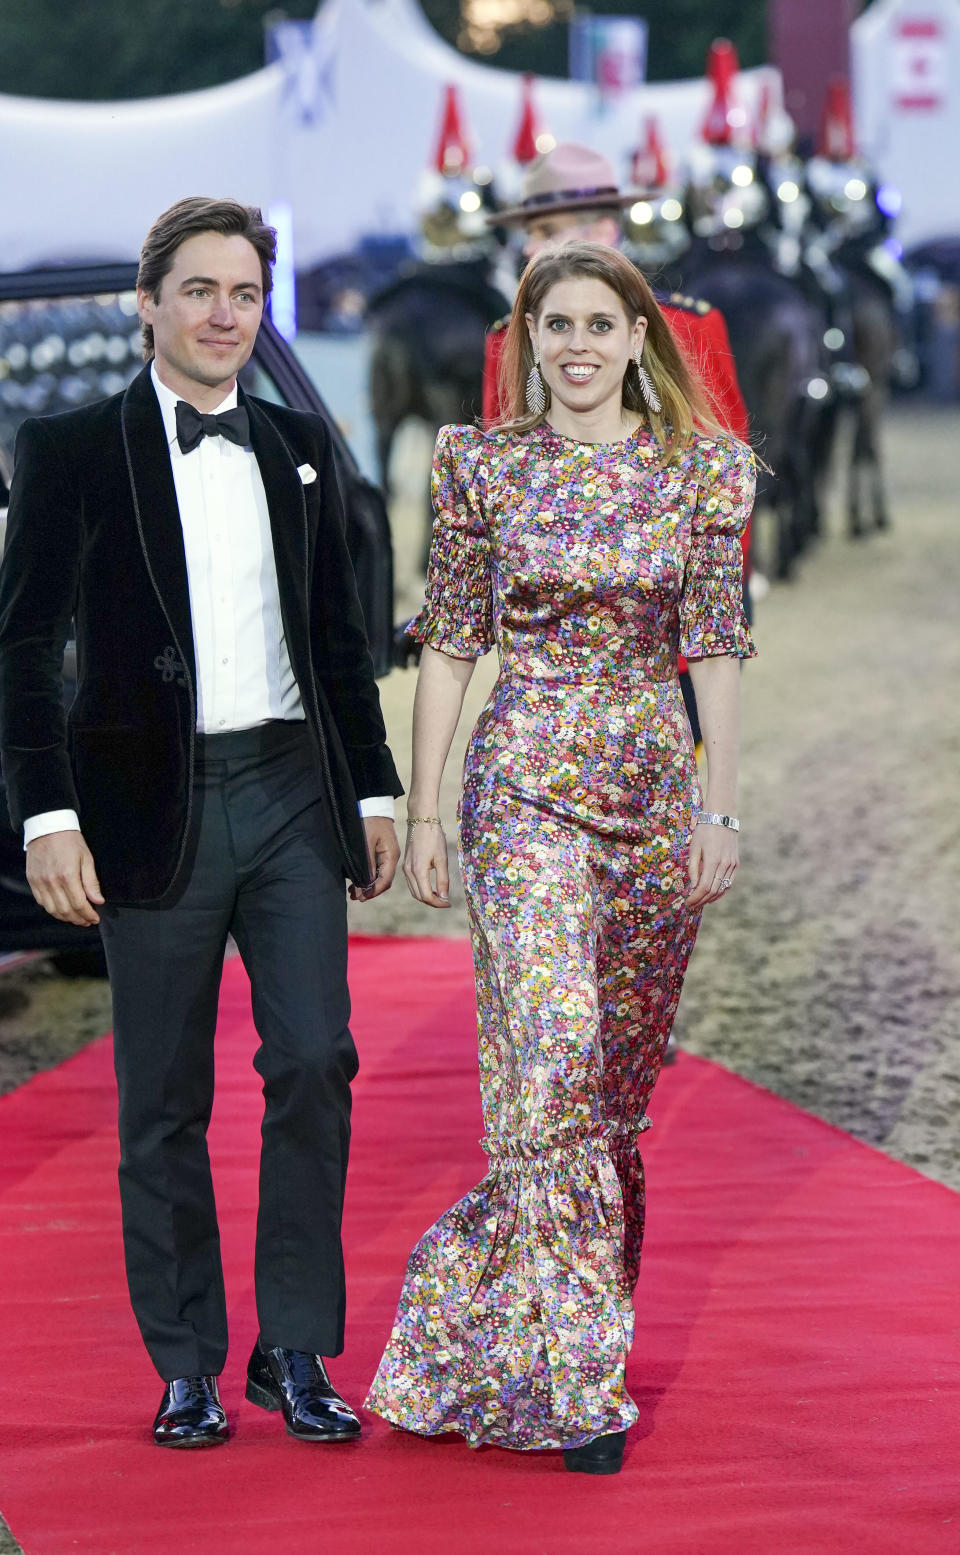 Princess Beatrice arriving with husband Edoardo Mapelli Mozzi during the charity preview night of A Gallop Through History (Getty Images)